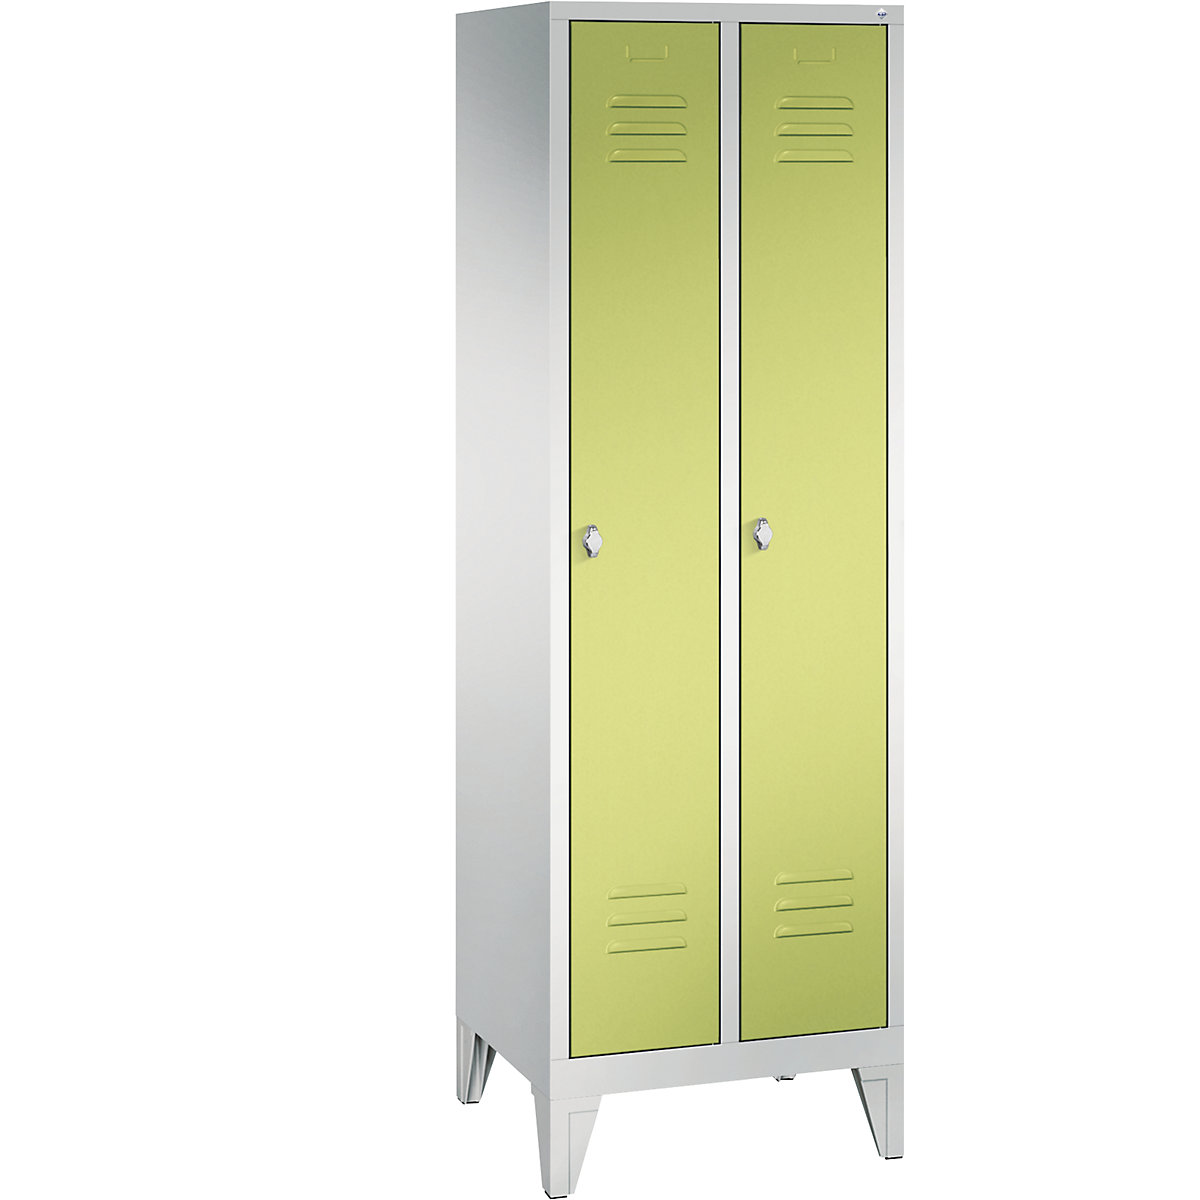 CLASSIC storage cupboard with feet – C+P, 2 compartments, compartment width 300 mm, light grey / viridian green-13